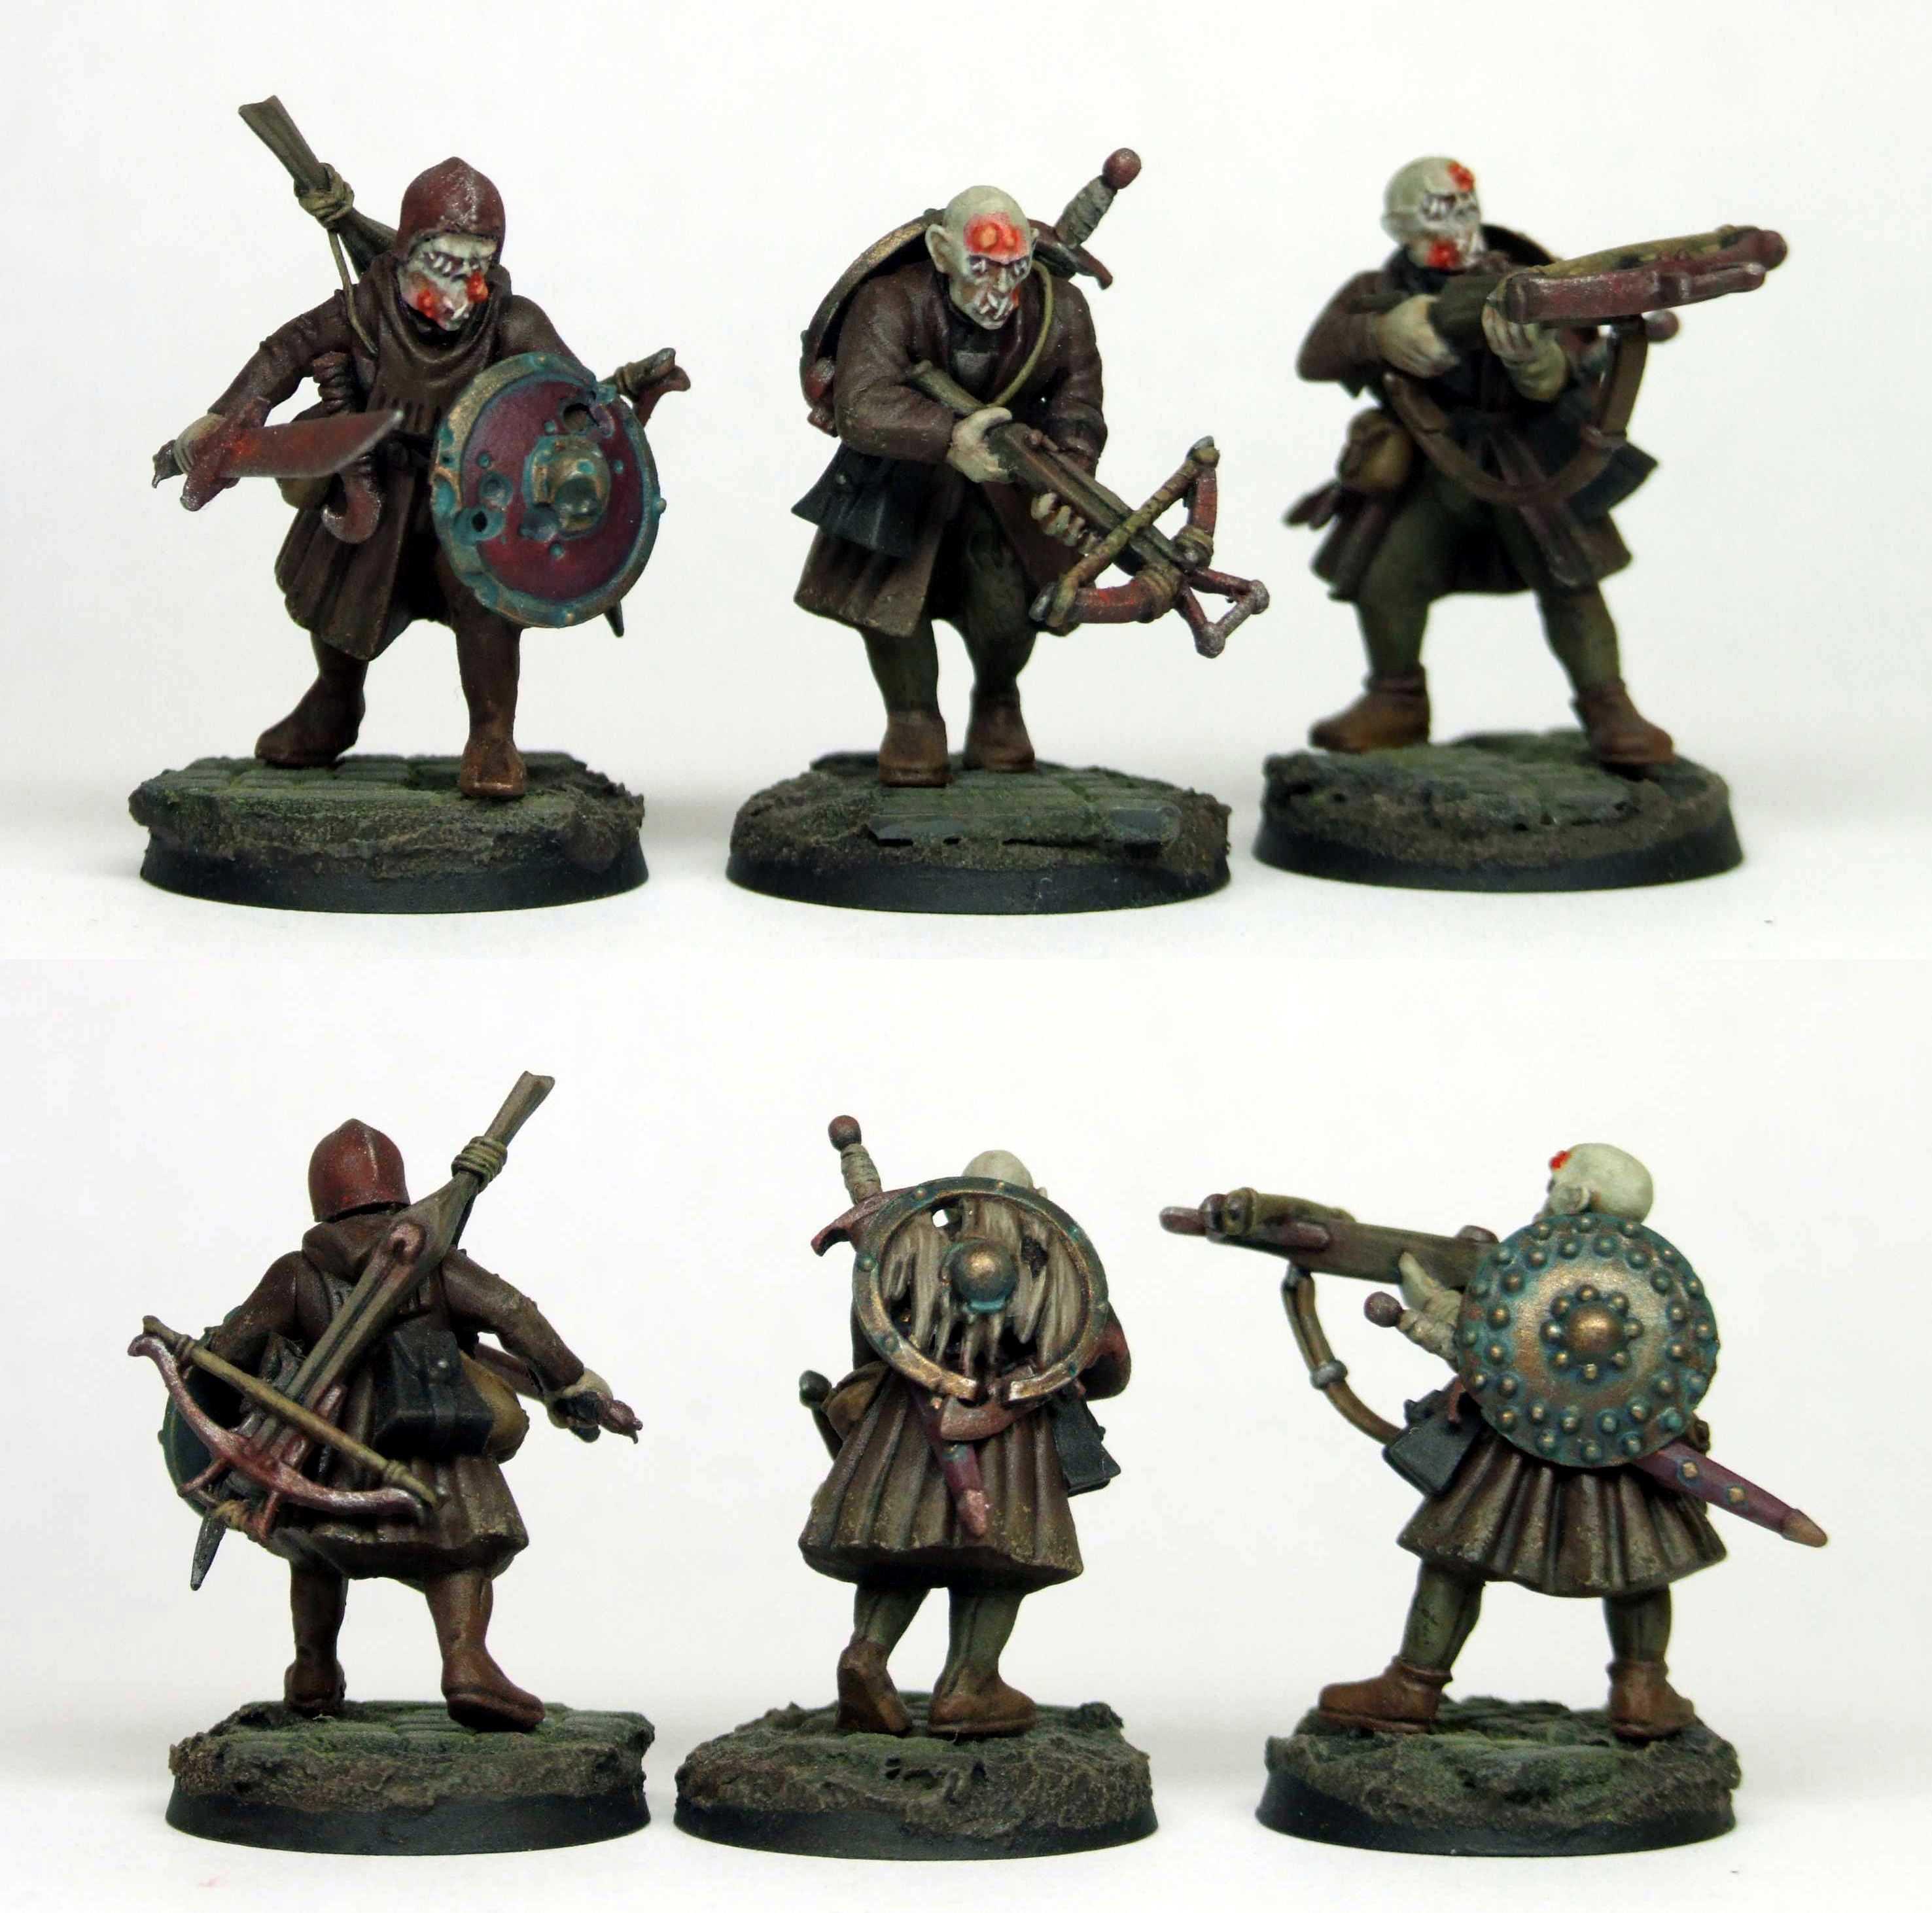 Chaos, Crossbow, Cultist, Empire, Nurgle, Realm Of Chaos